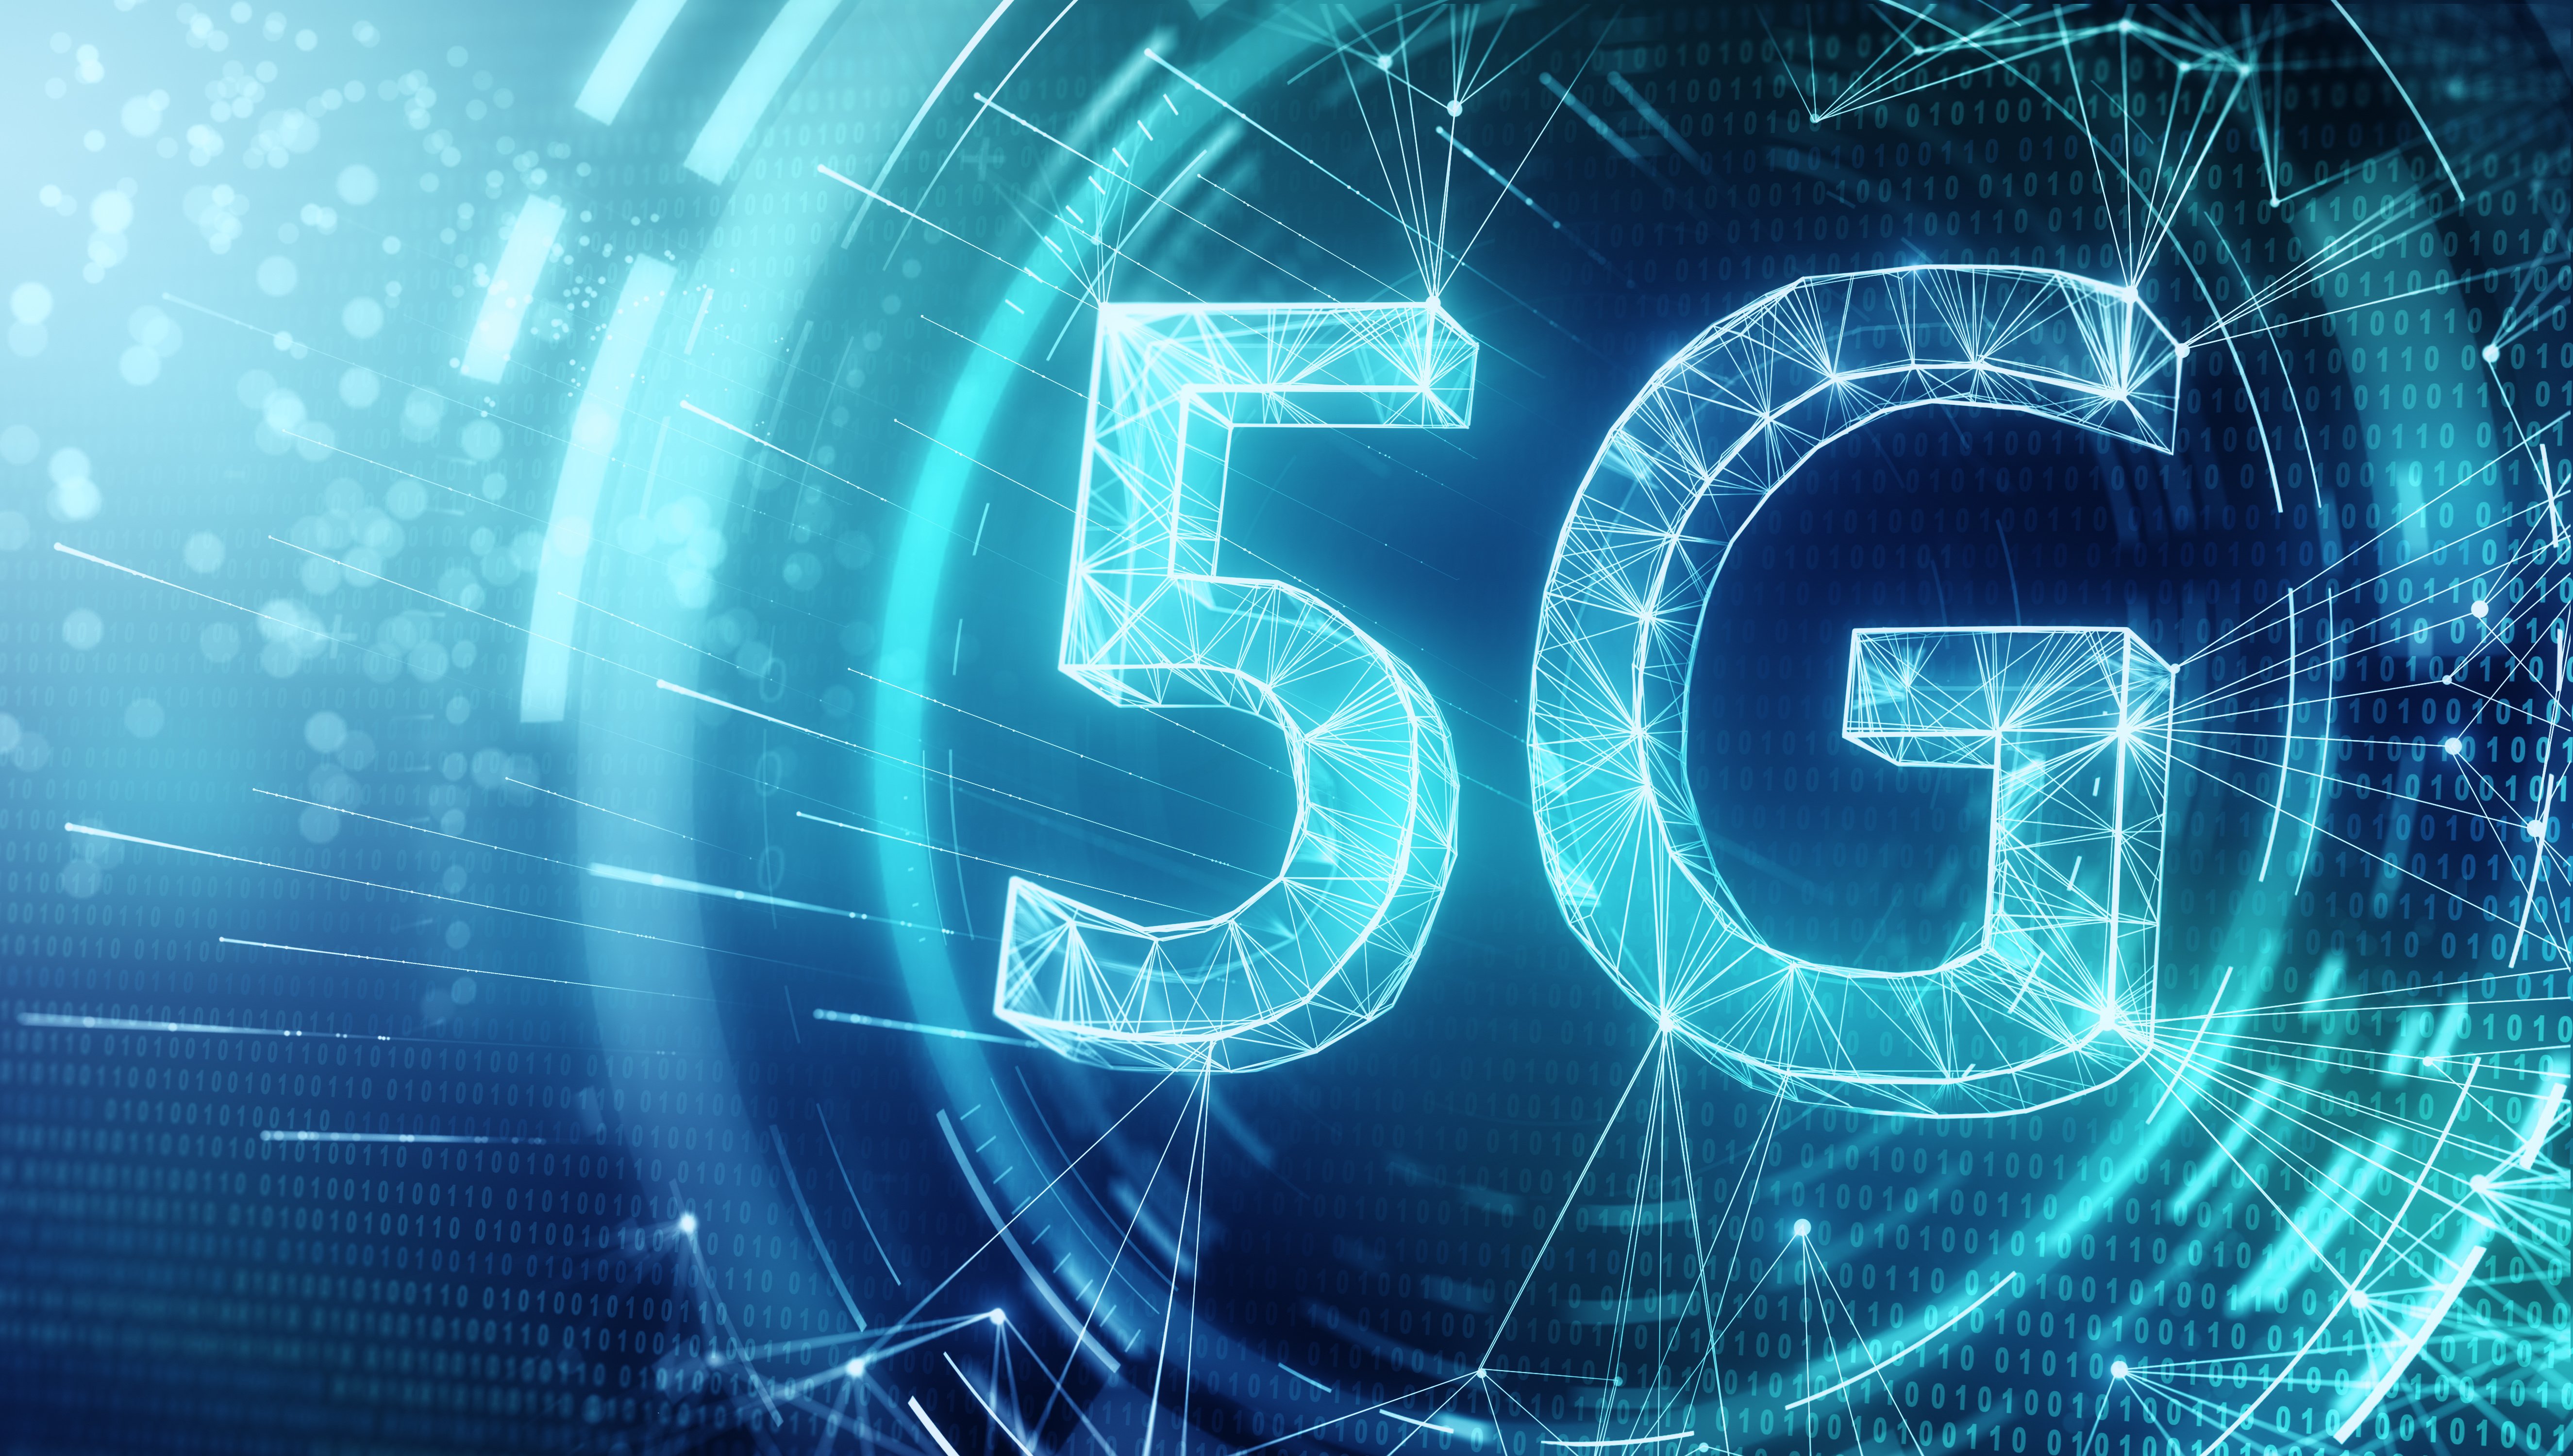 Quickly deploy an integrated, secure battlespace-ready 5G solution  